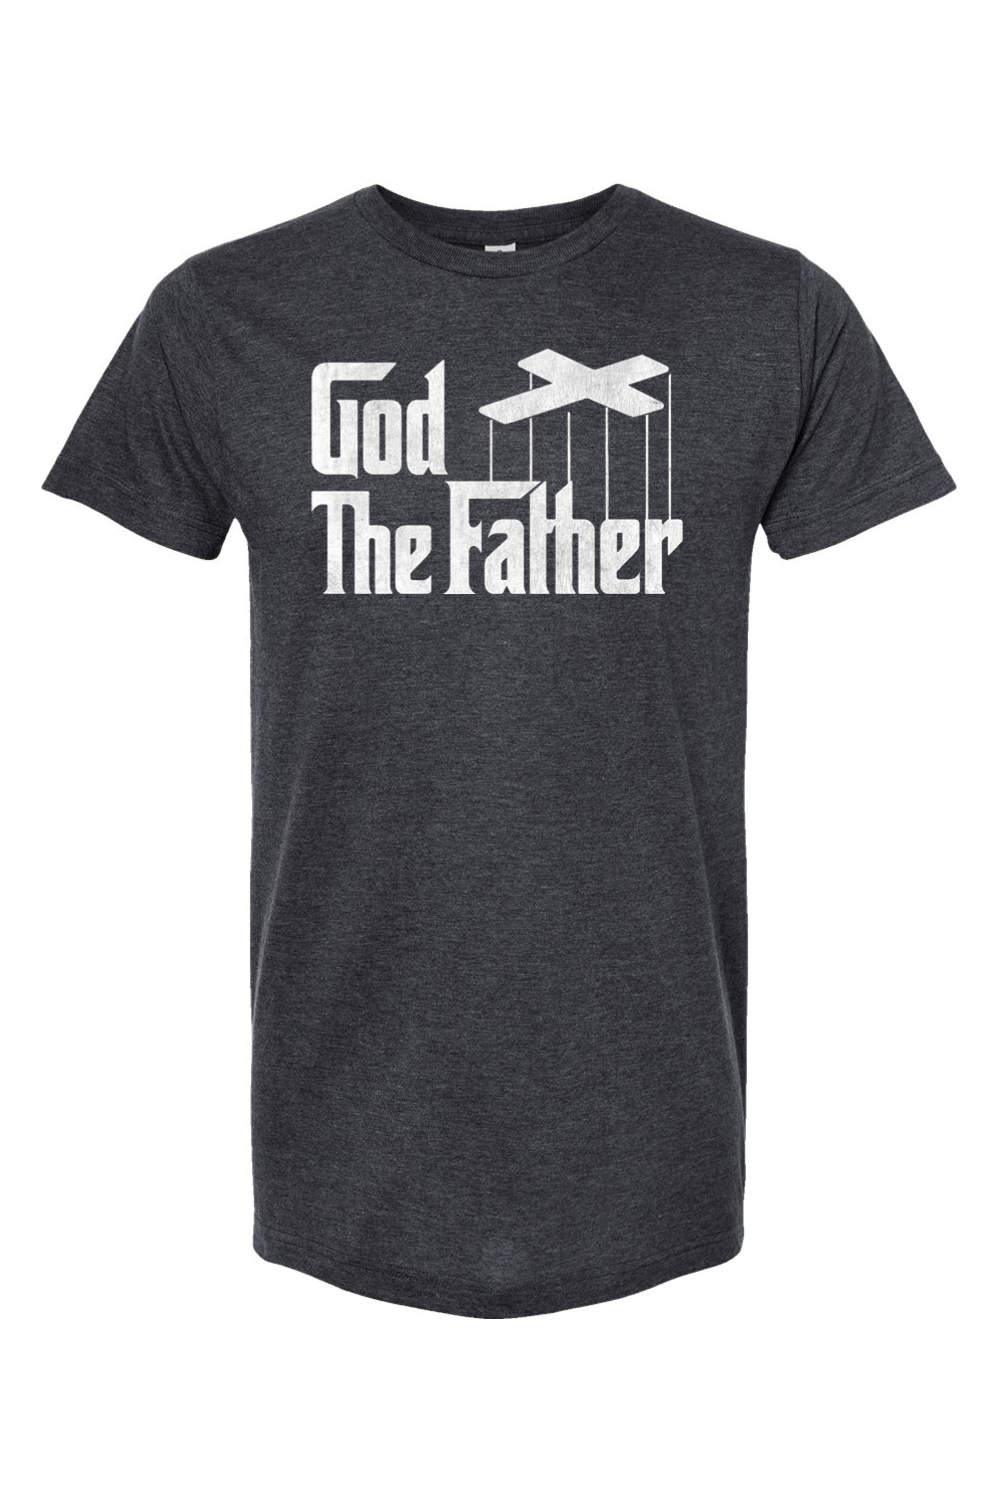 God the Father - T-Shirt